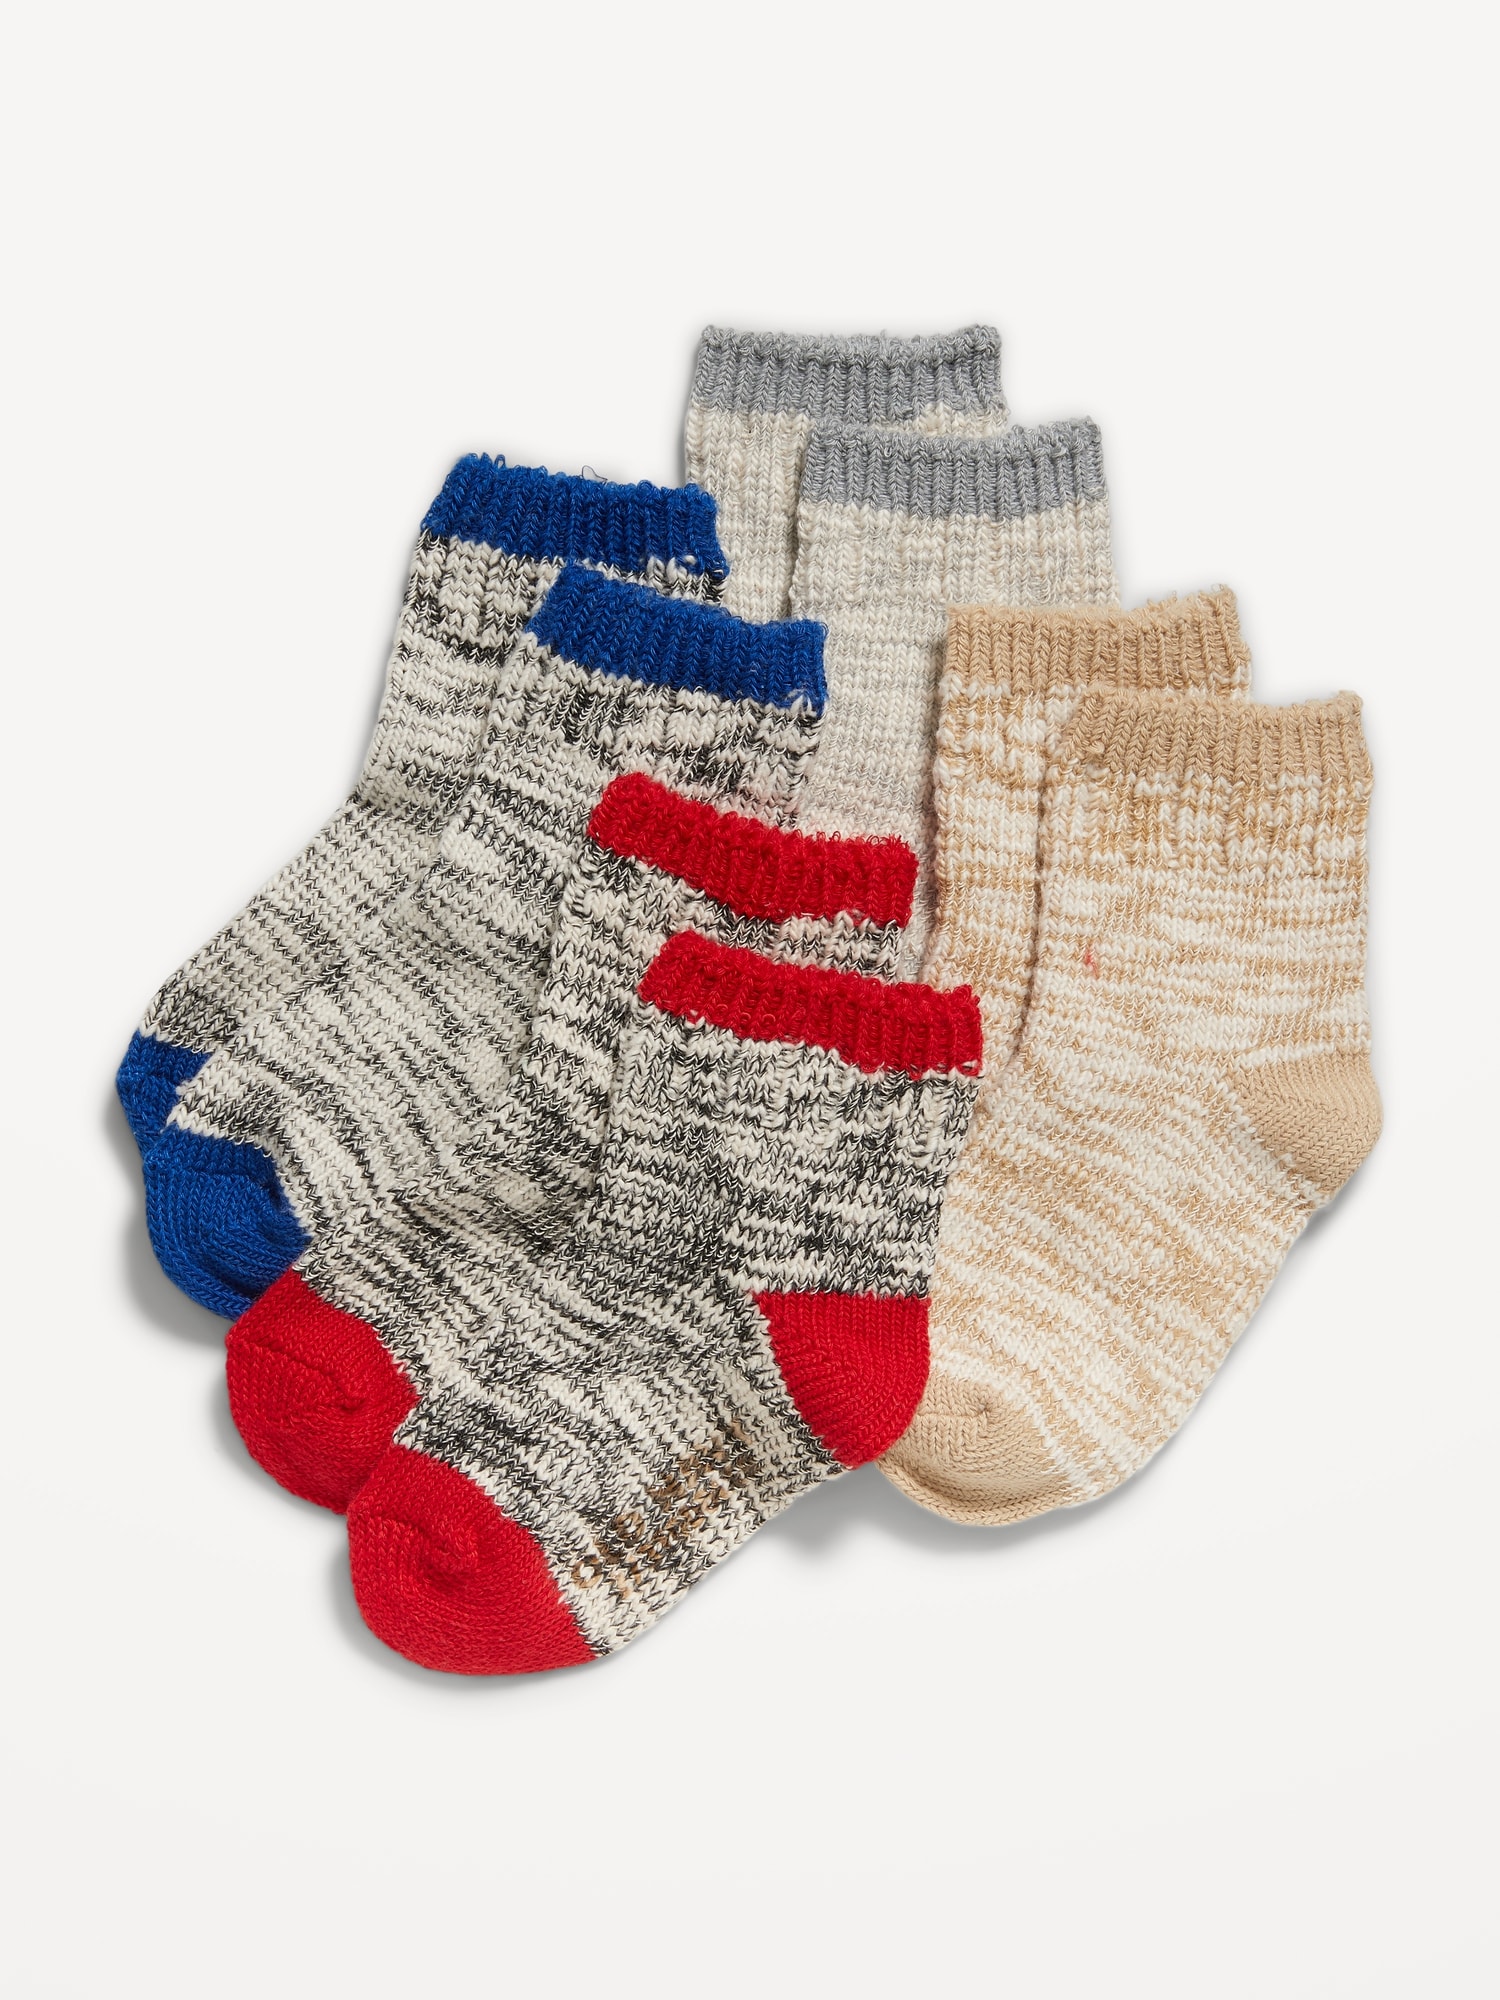 Unisex Marled-Knit Crew Socks 4-Pack for Toddler & Baby | Old Navy